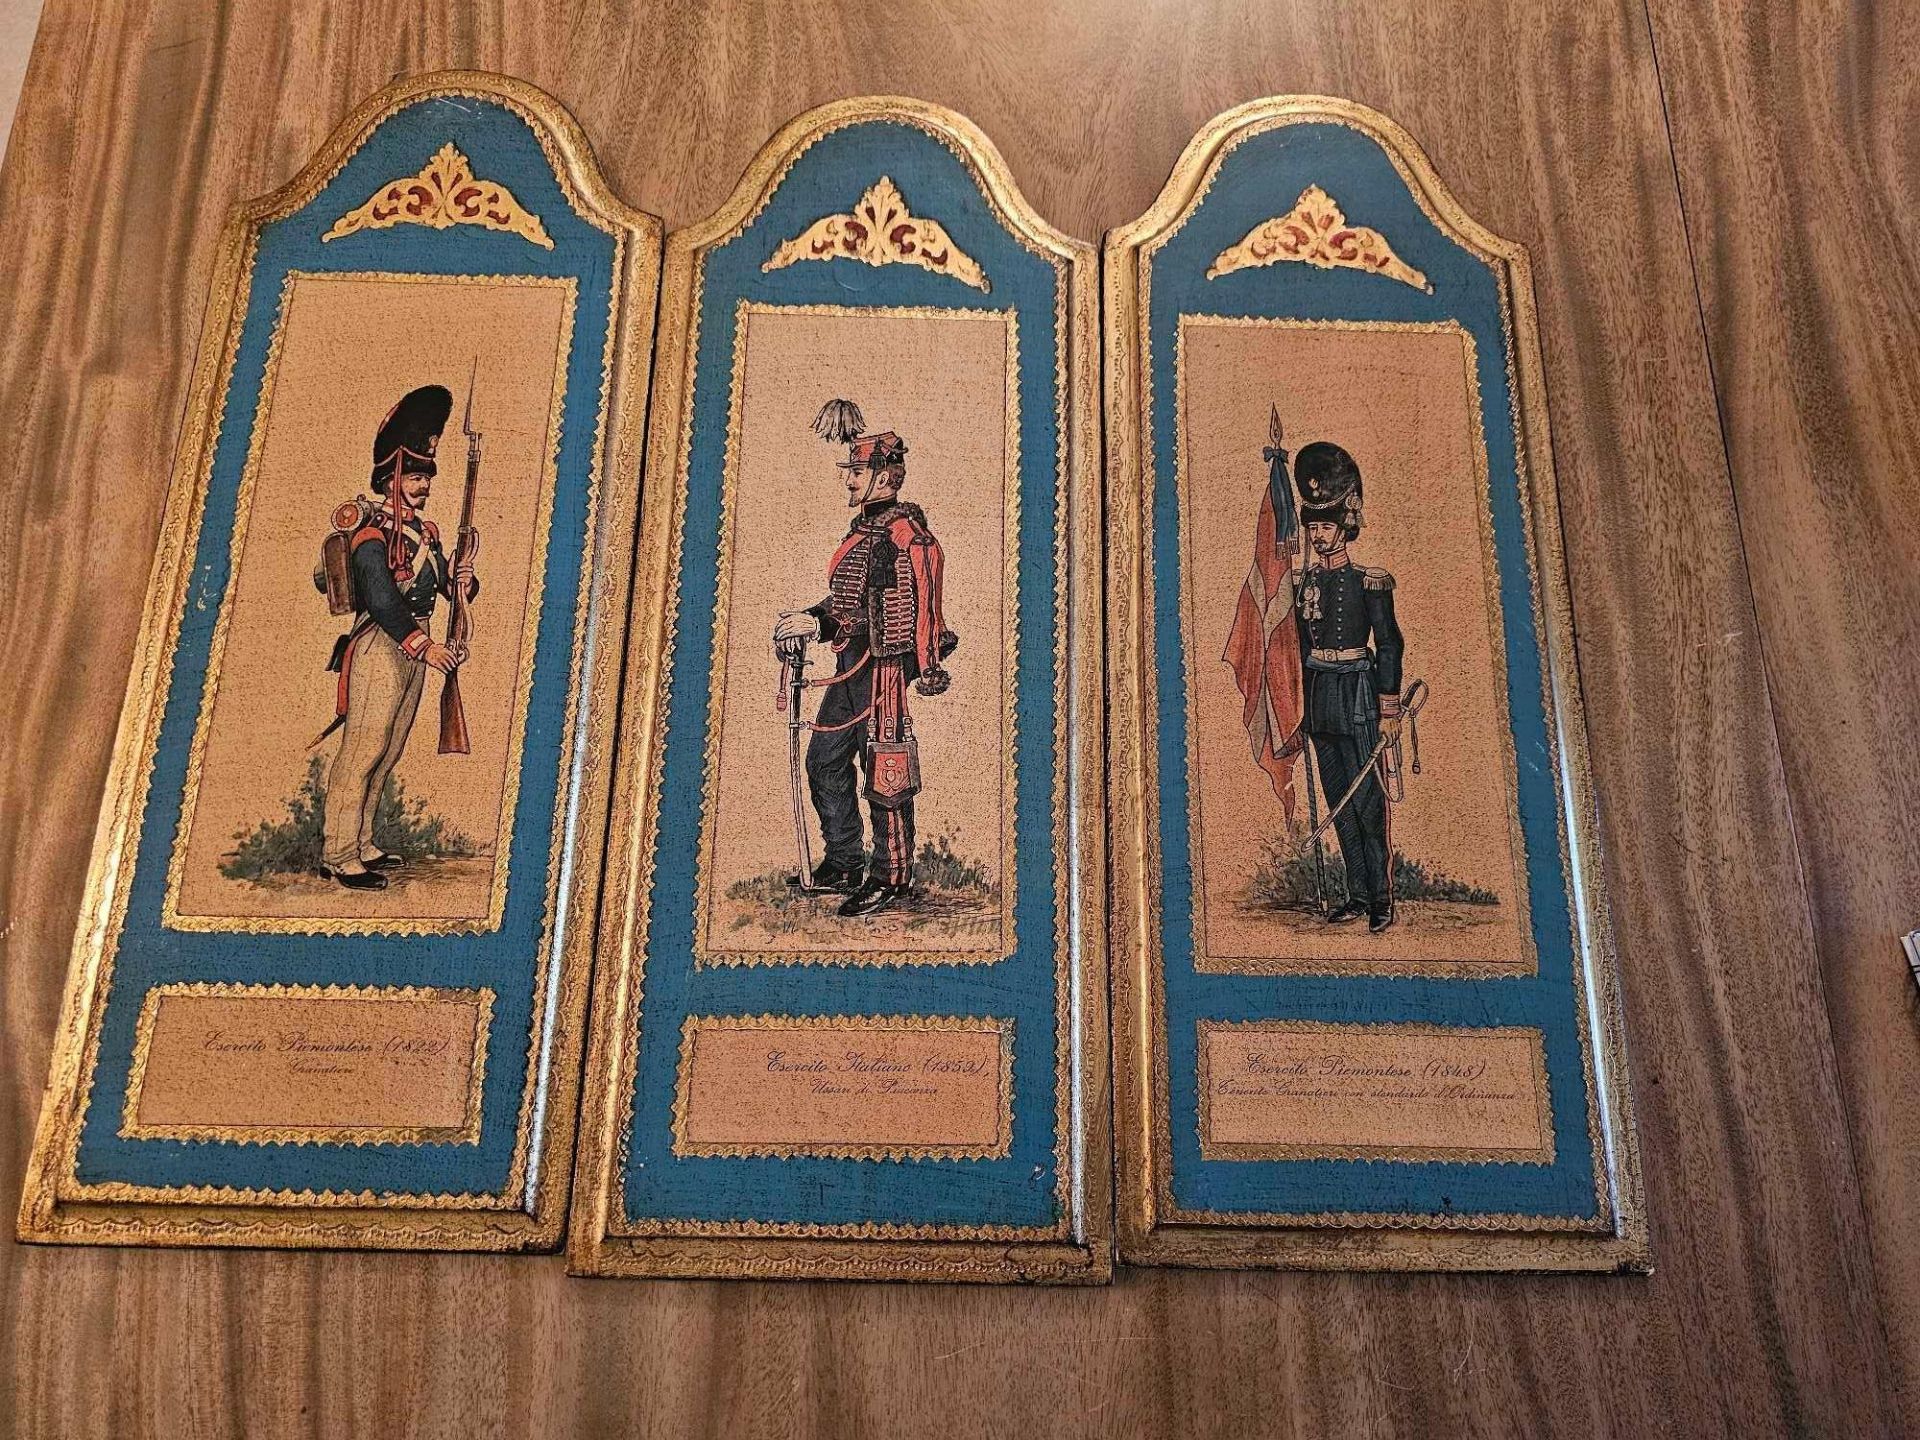 A Set Of 3 X Vintage Esercito Piemontese Italian Soldiers 1822 Prints On Wooden Plaques 20 X 52cm